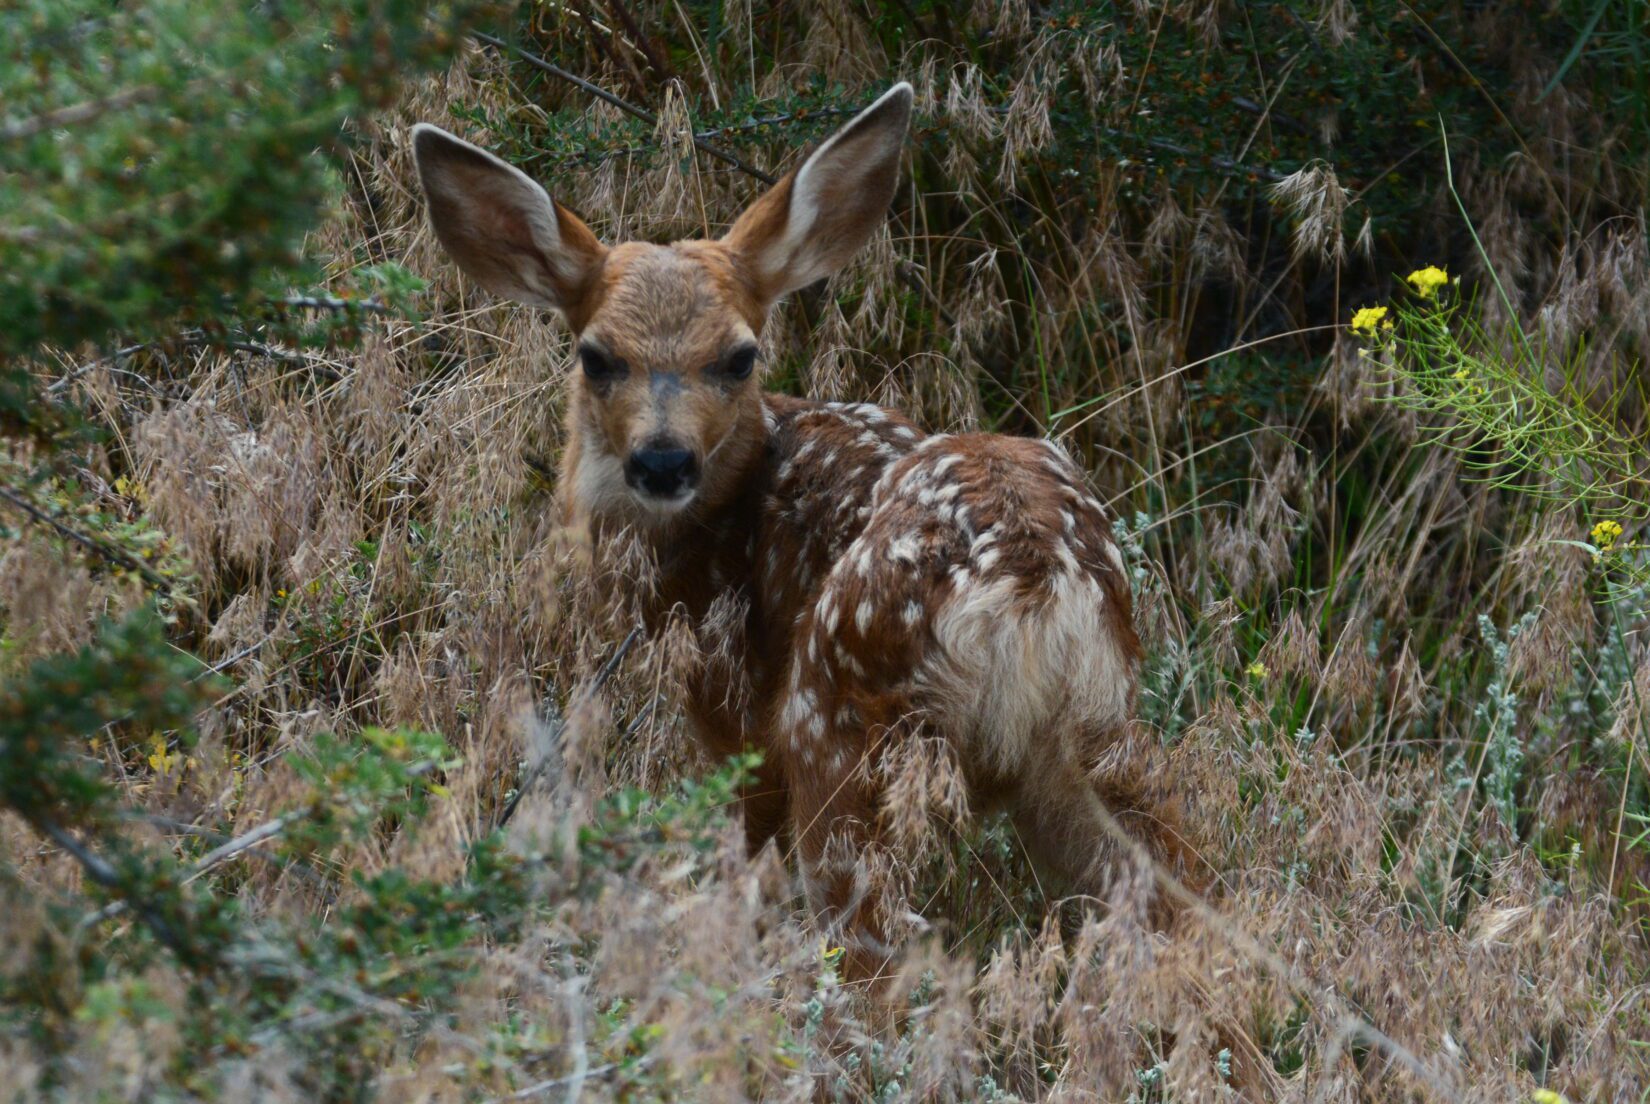 Deer fawn in grass and brush